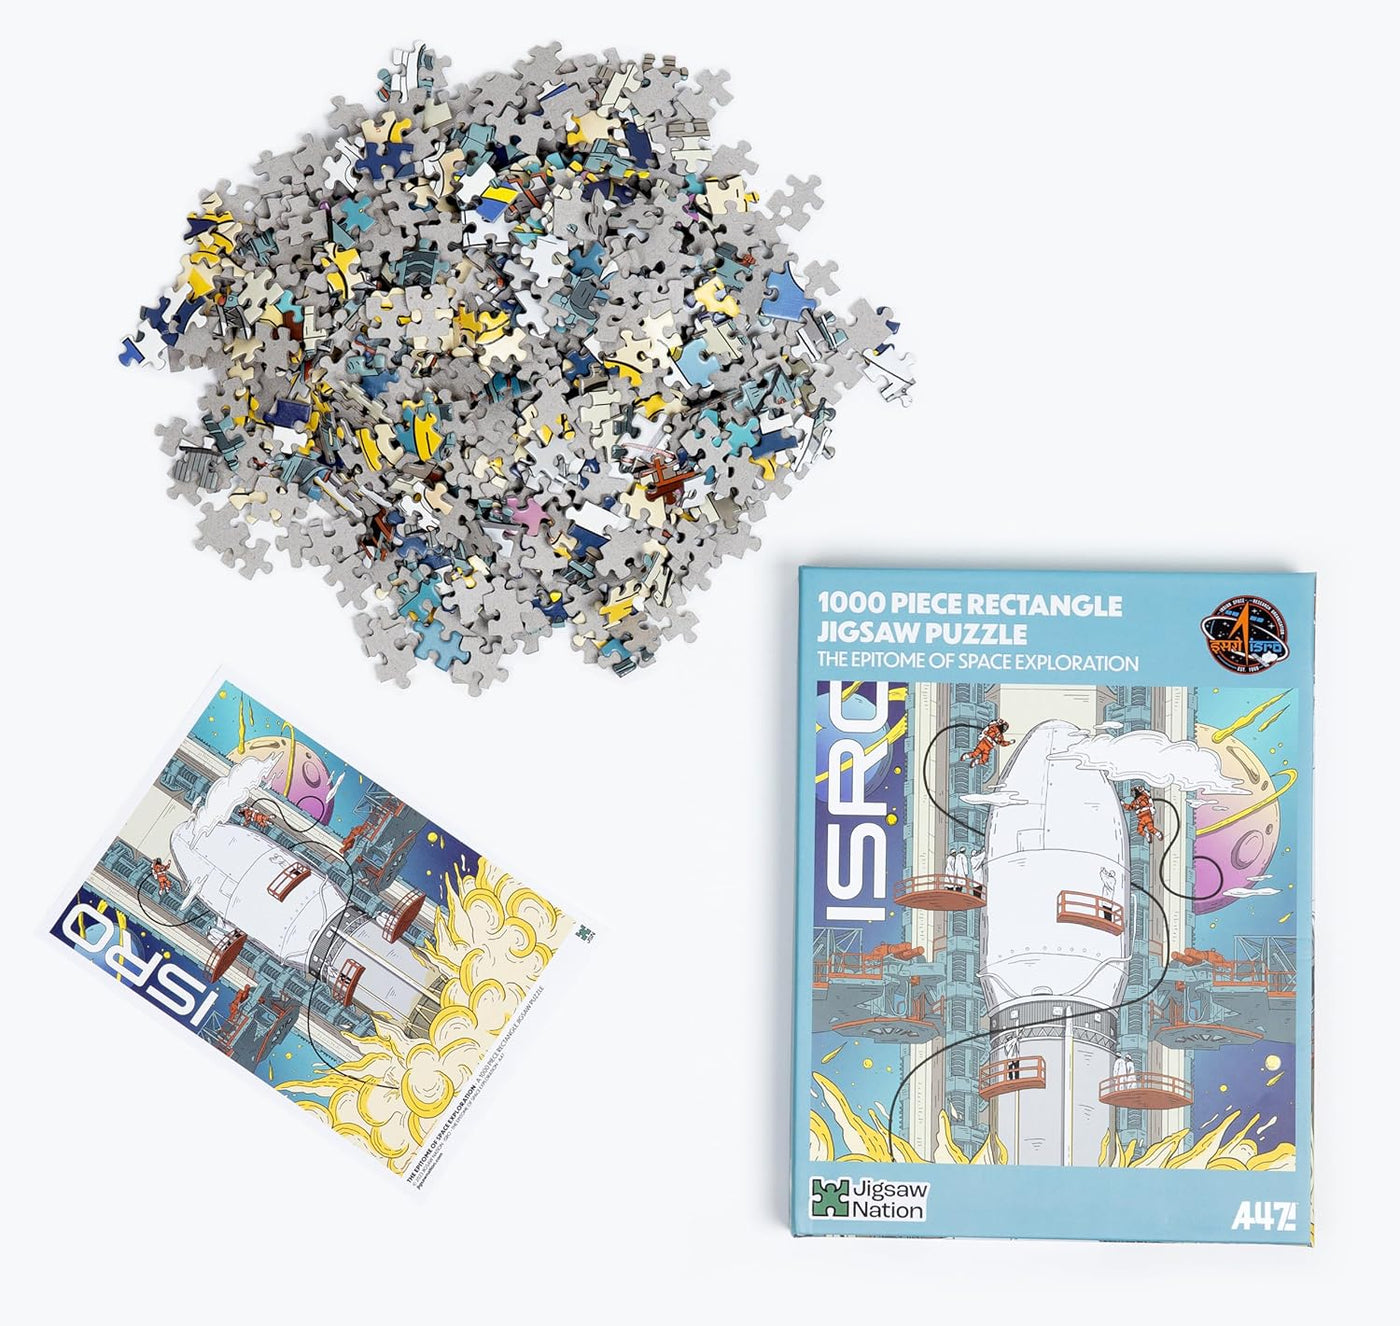 Jigsaw Nation: The Epitome of Space Exploration – ISRO by A47 – 1000 Piece Jigsaw Puzzle